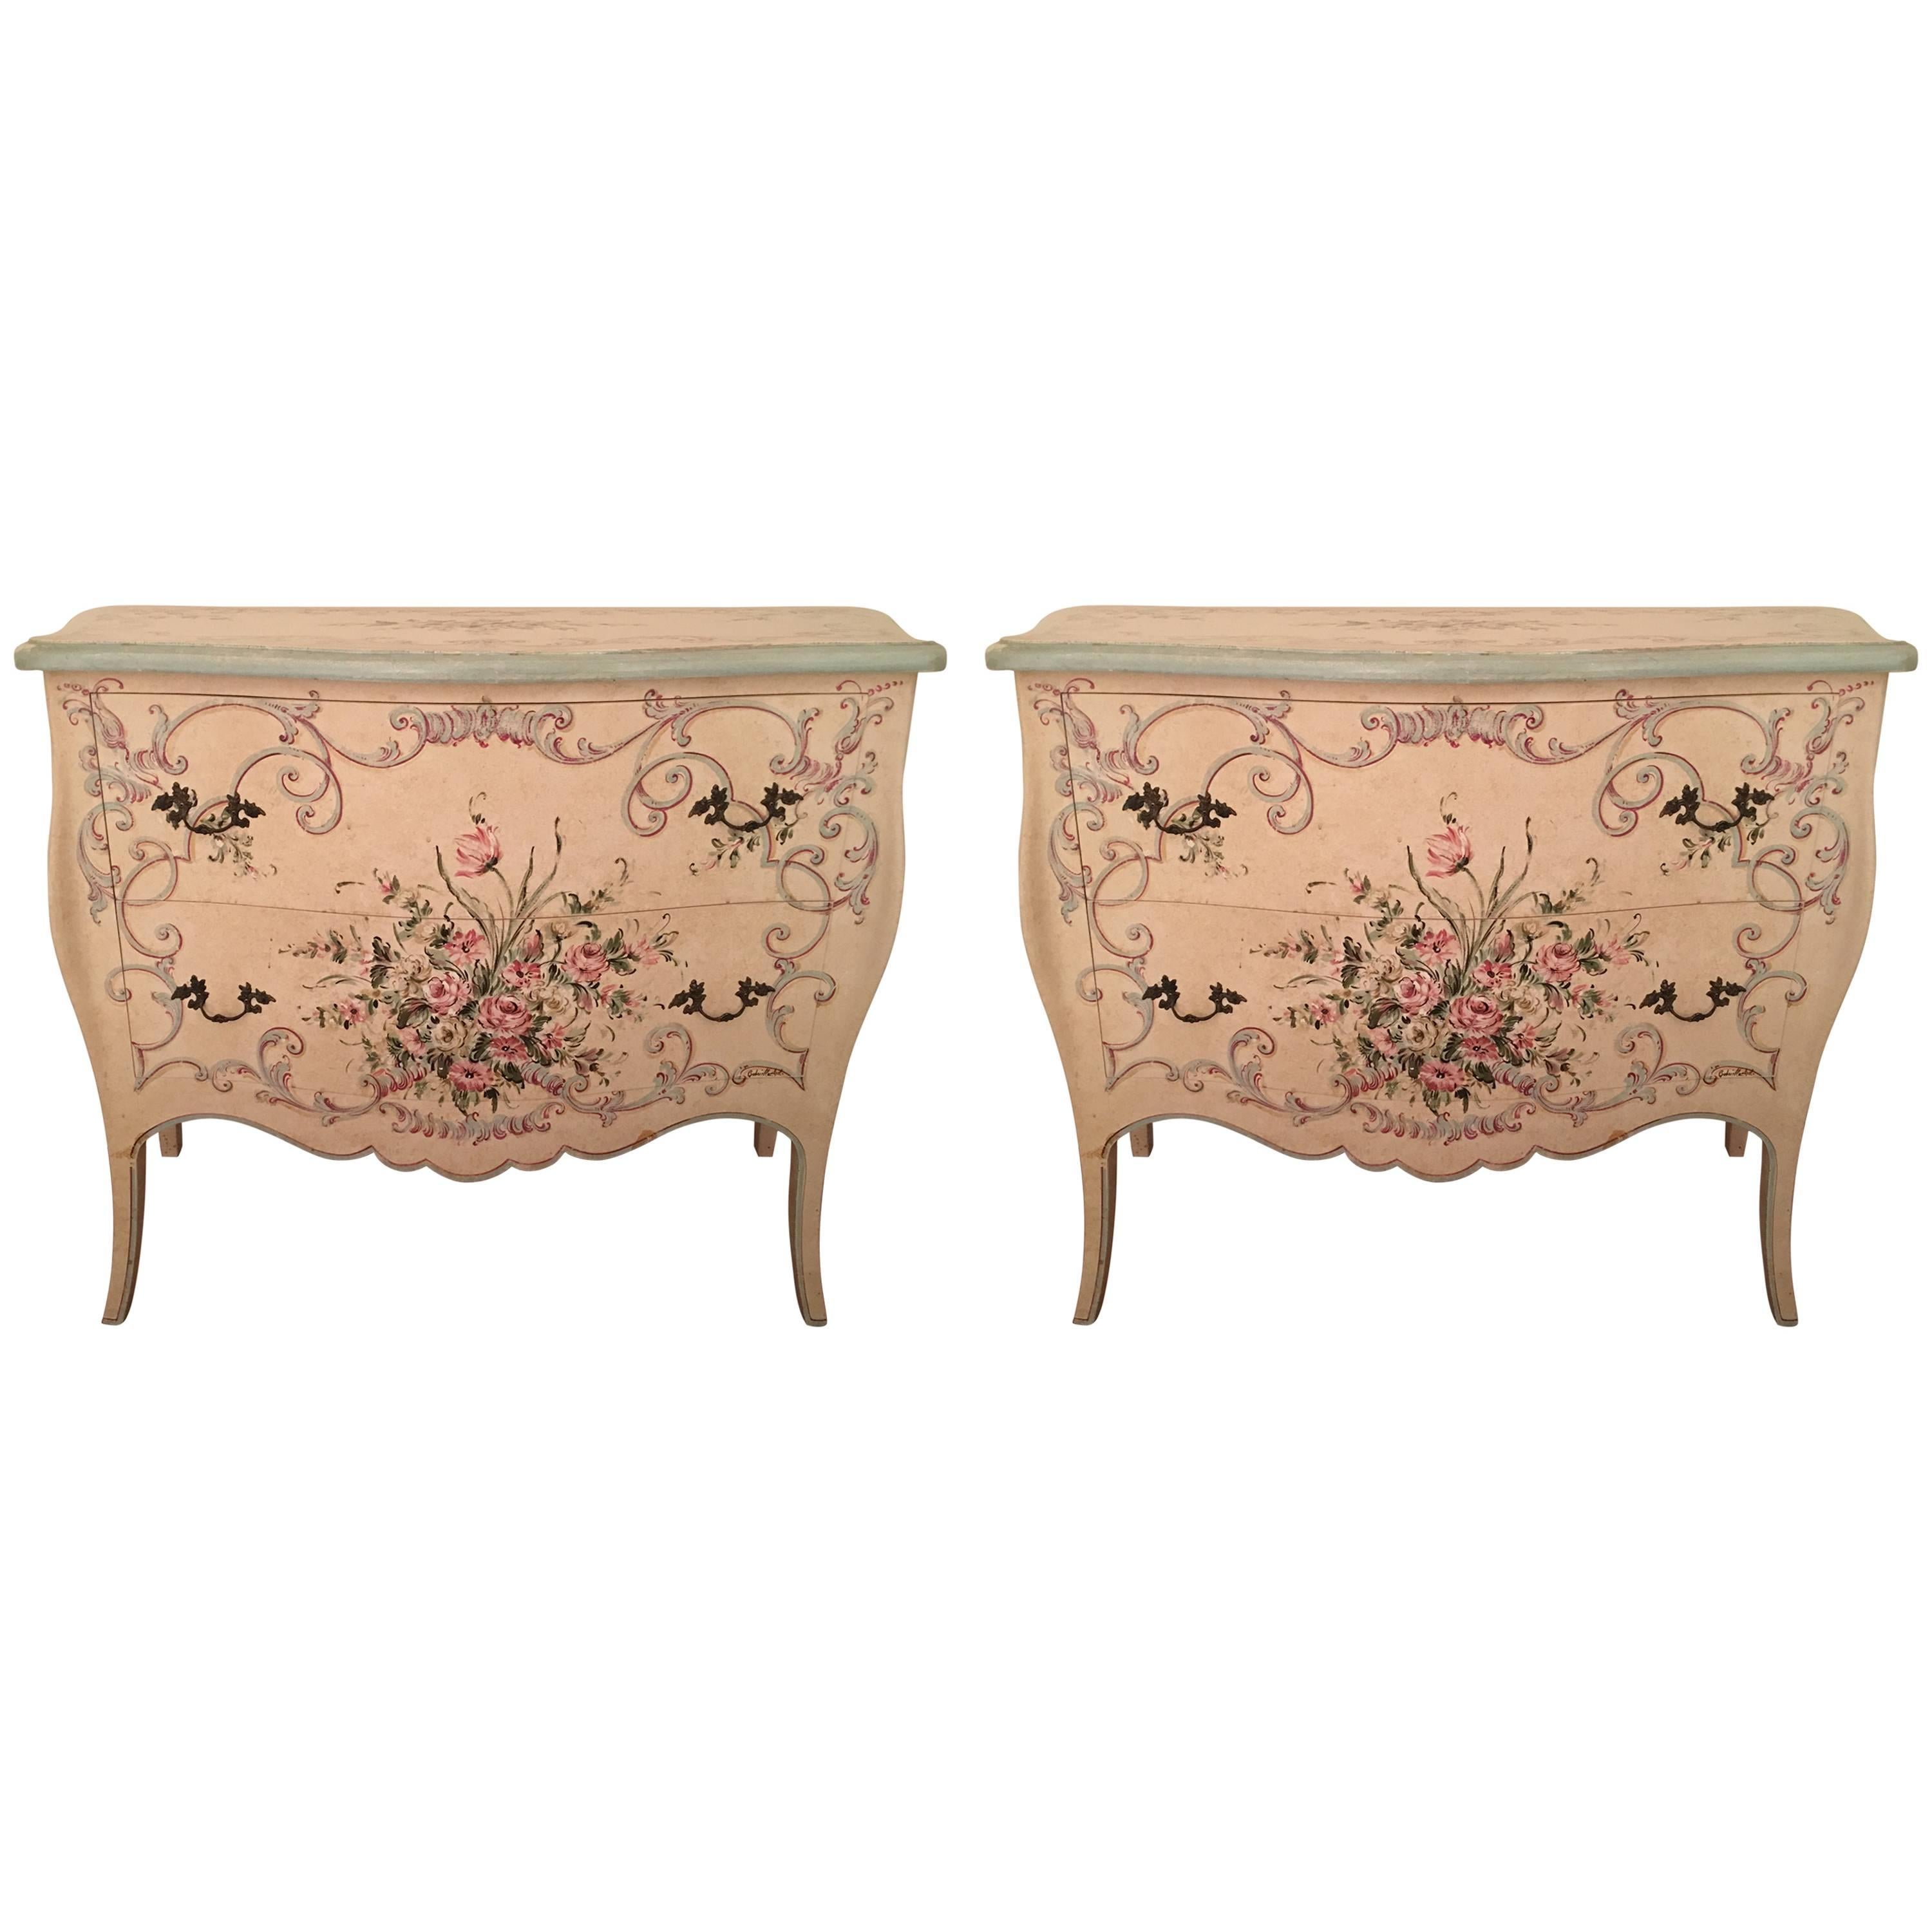 Pair of Charming Hand-Painted Italian Chest of Drawers Commodes